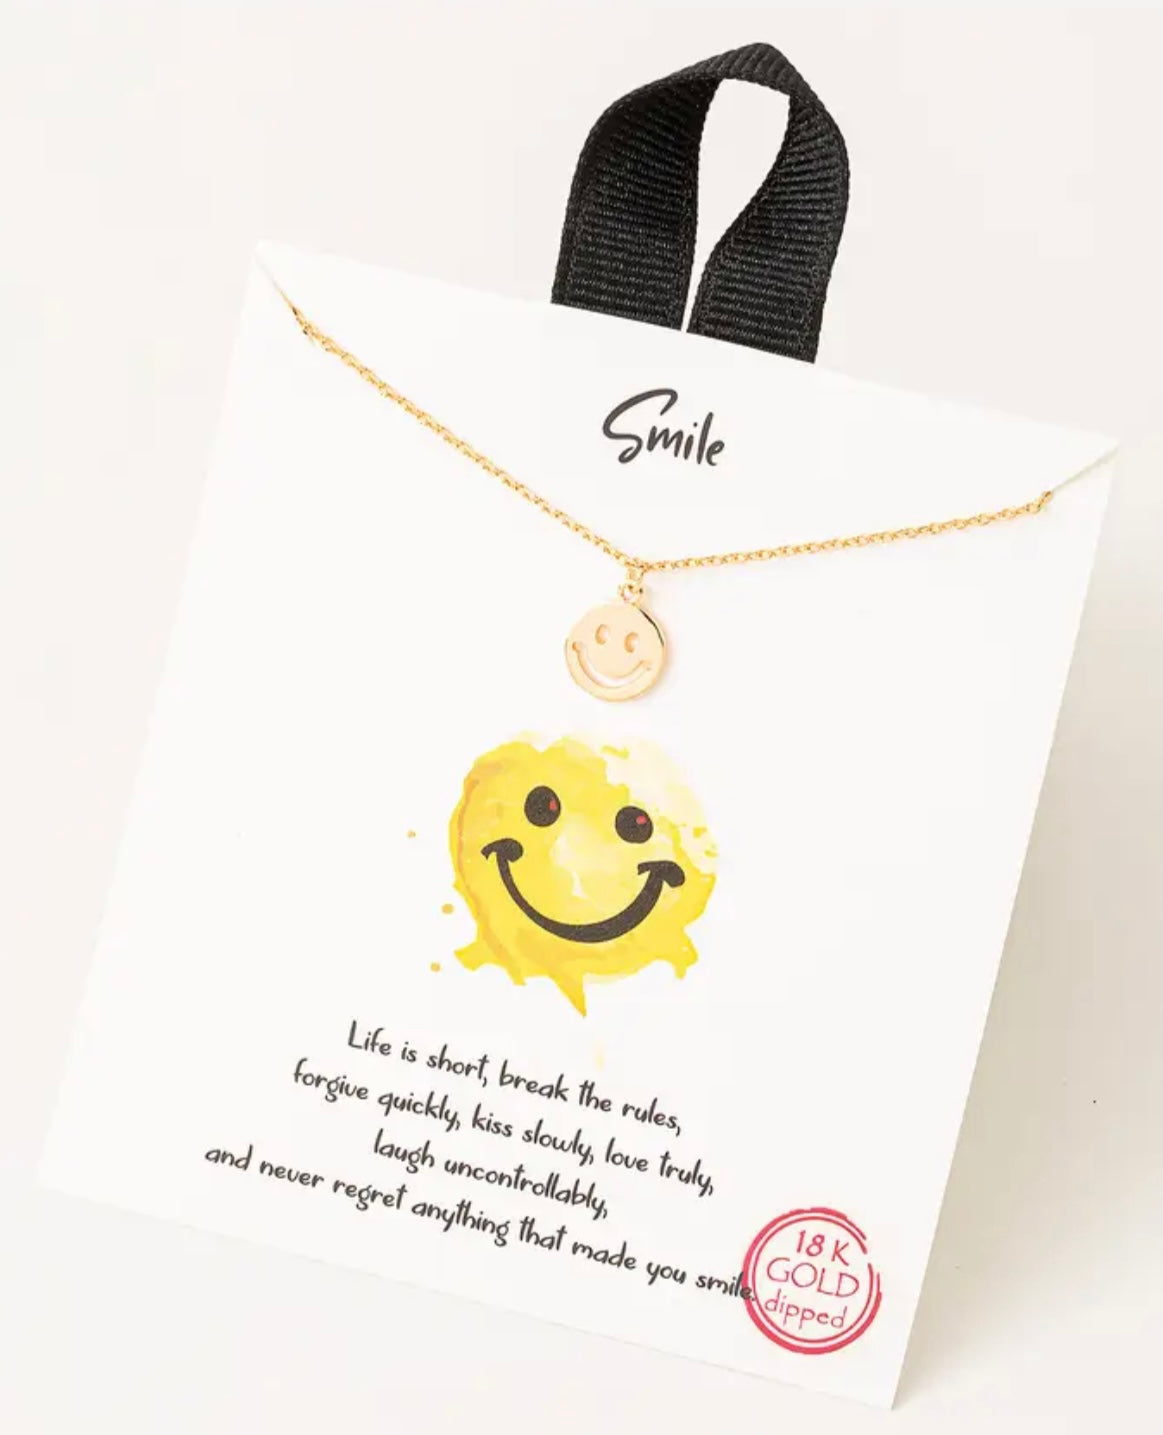 Gold smiley face necklace